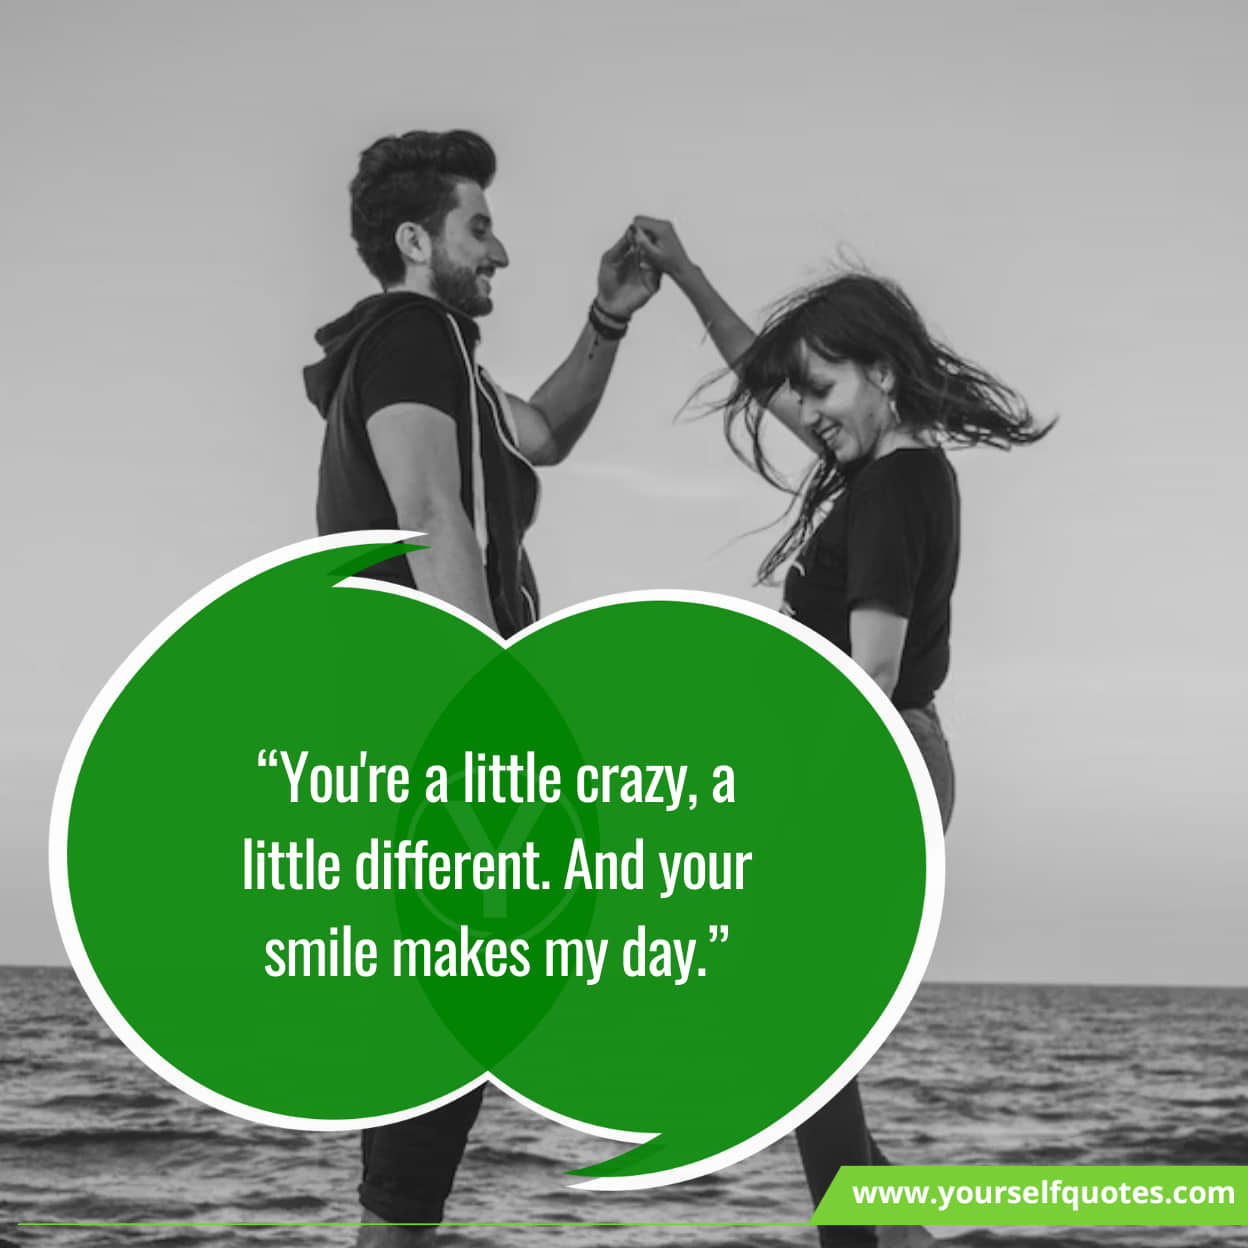 Quotes to cherish the bond with your girlfriend